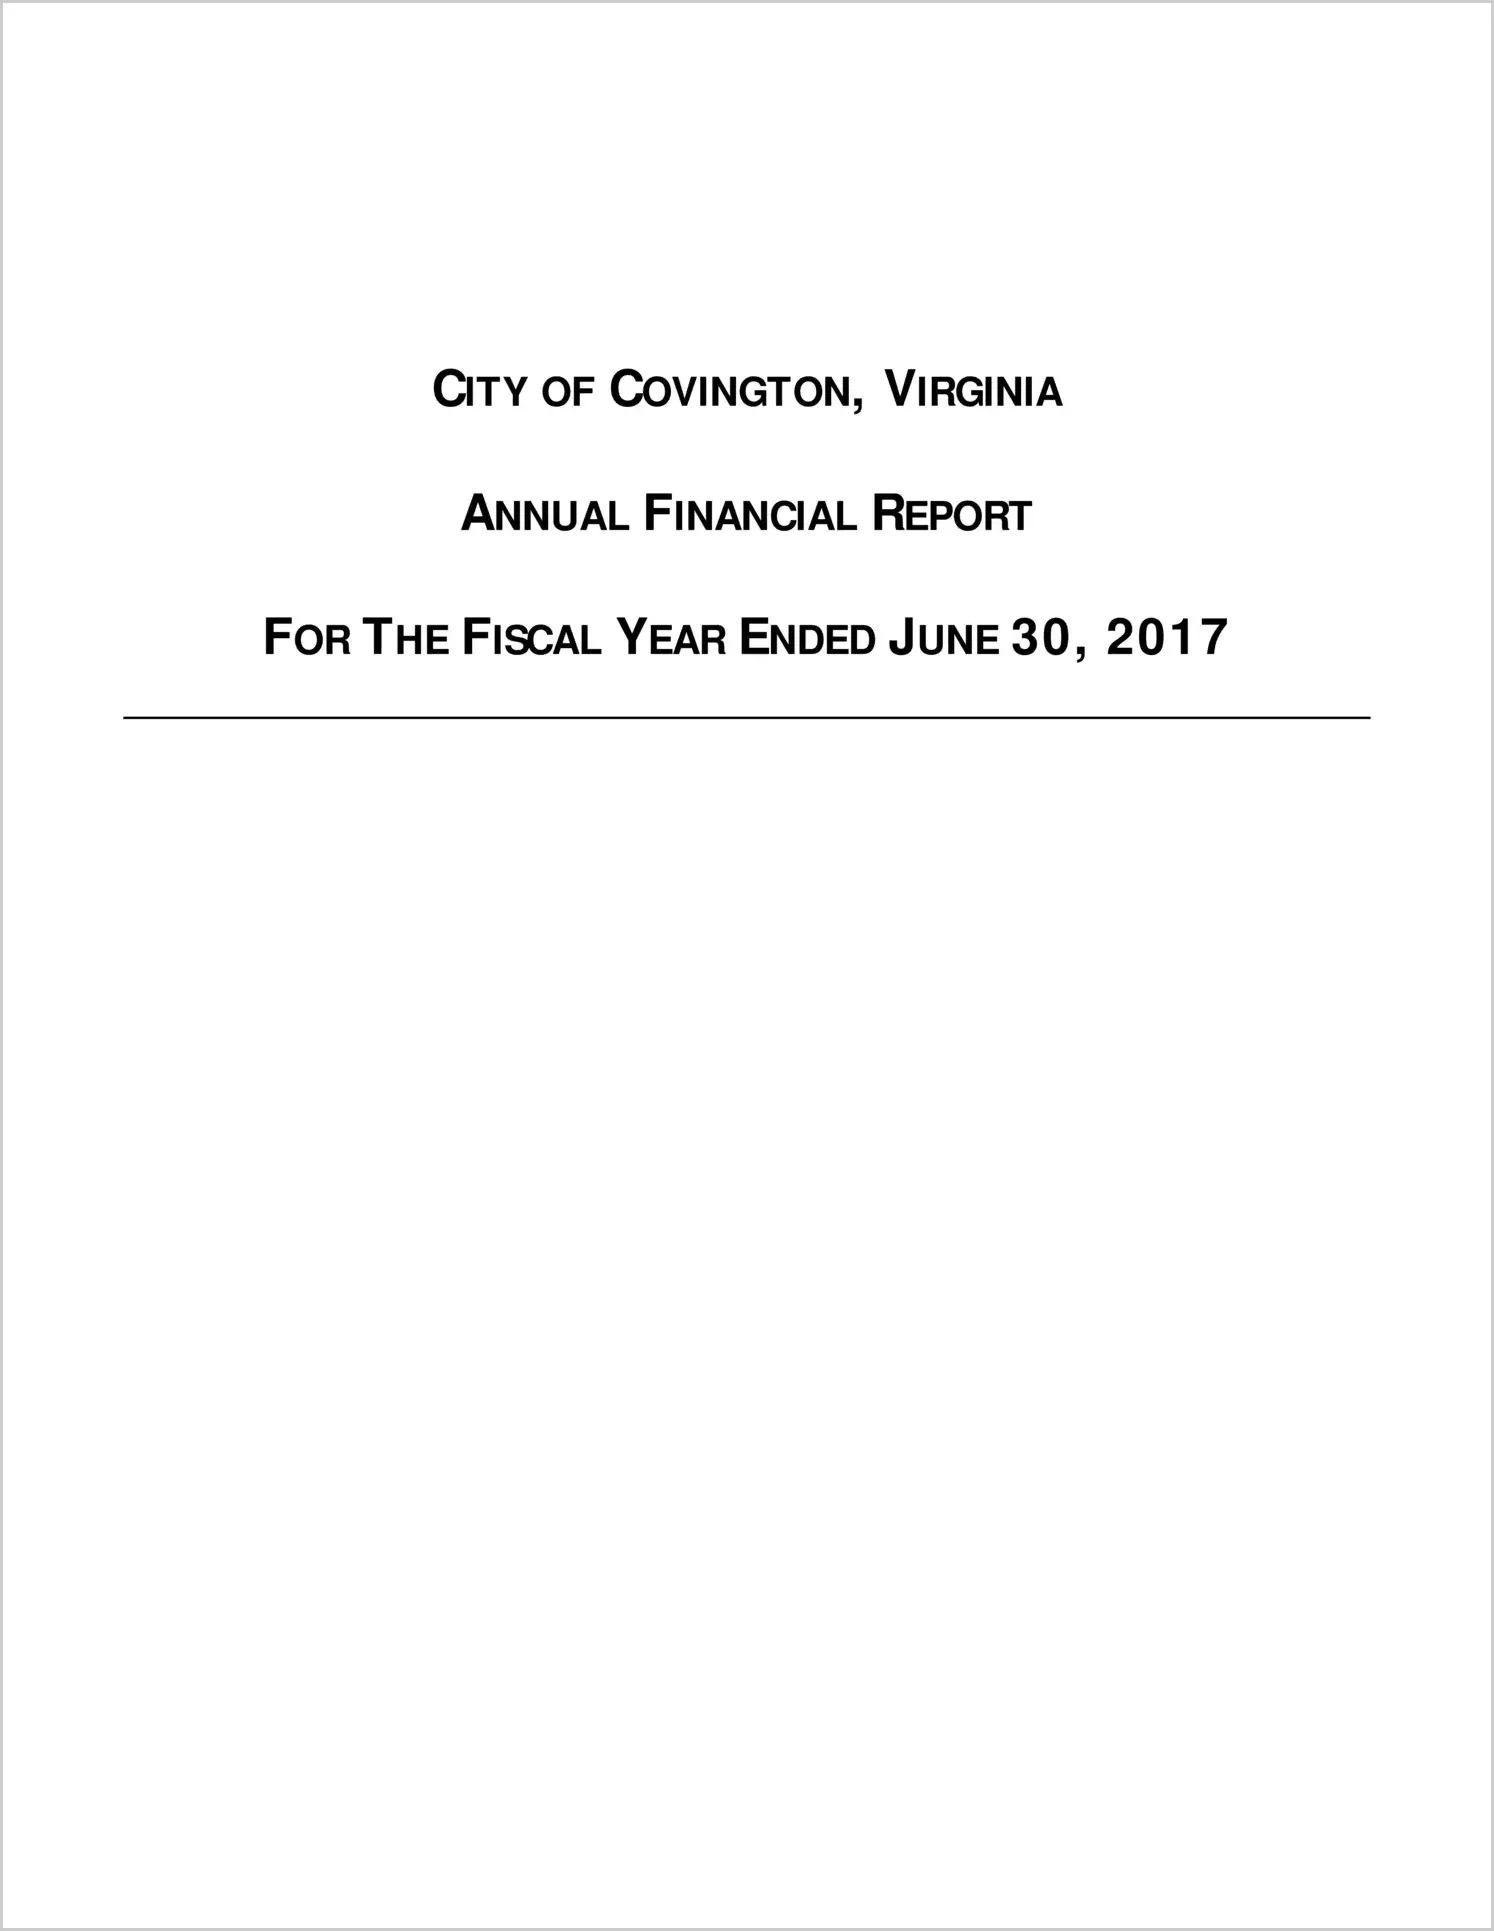 2017 Annual Financial Report for City of Covington